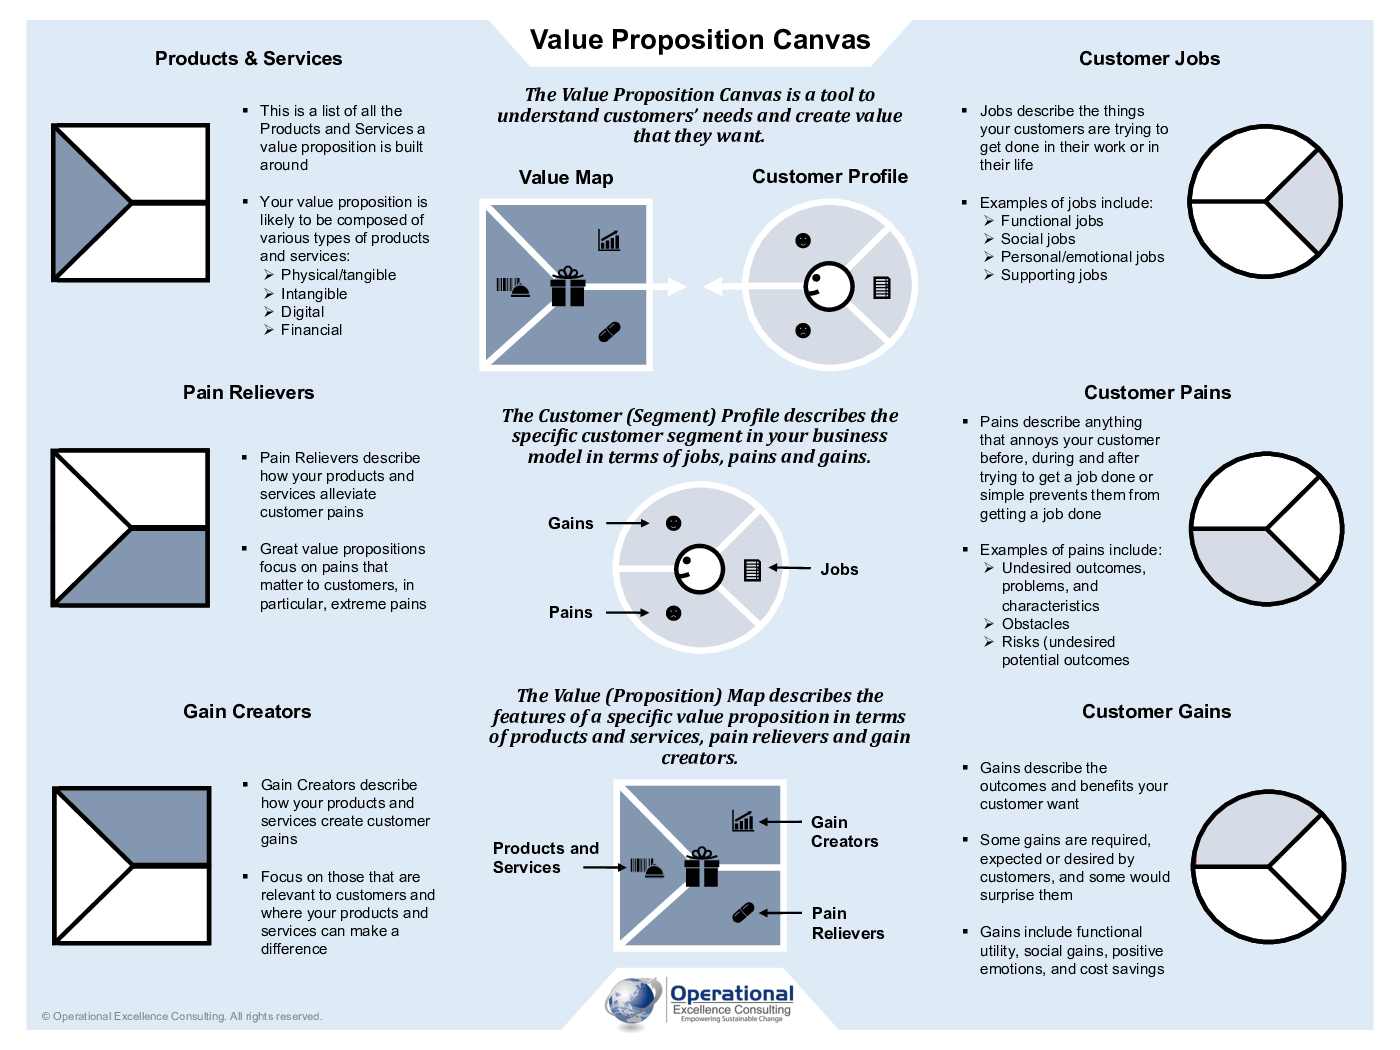 Value Proposition Canvas (VPC) Poster (3-page PDF document) Preview Image